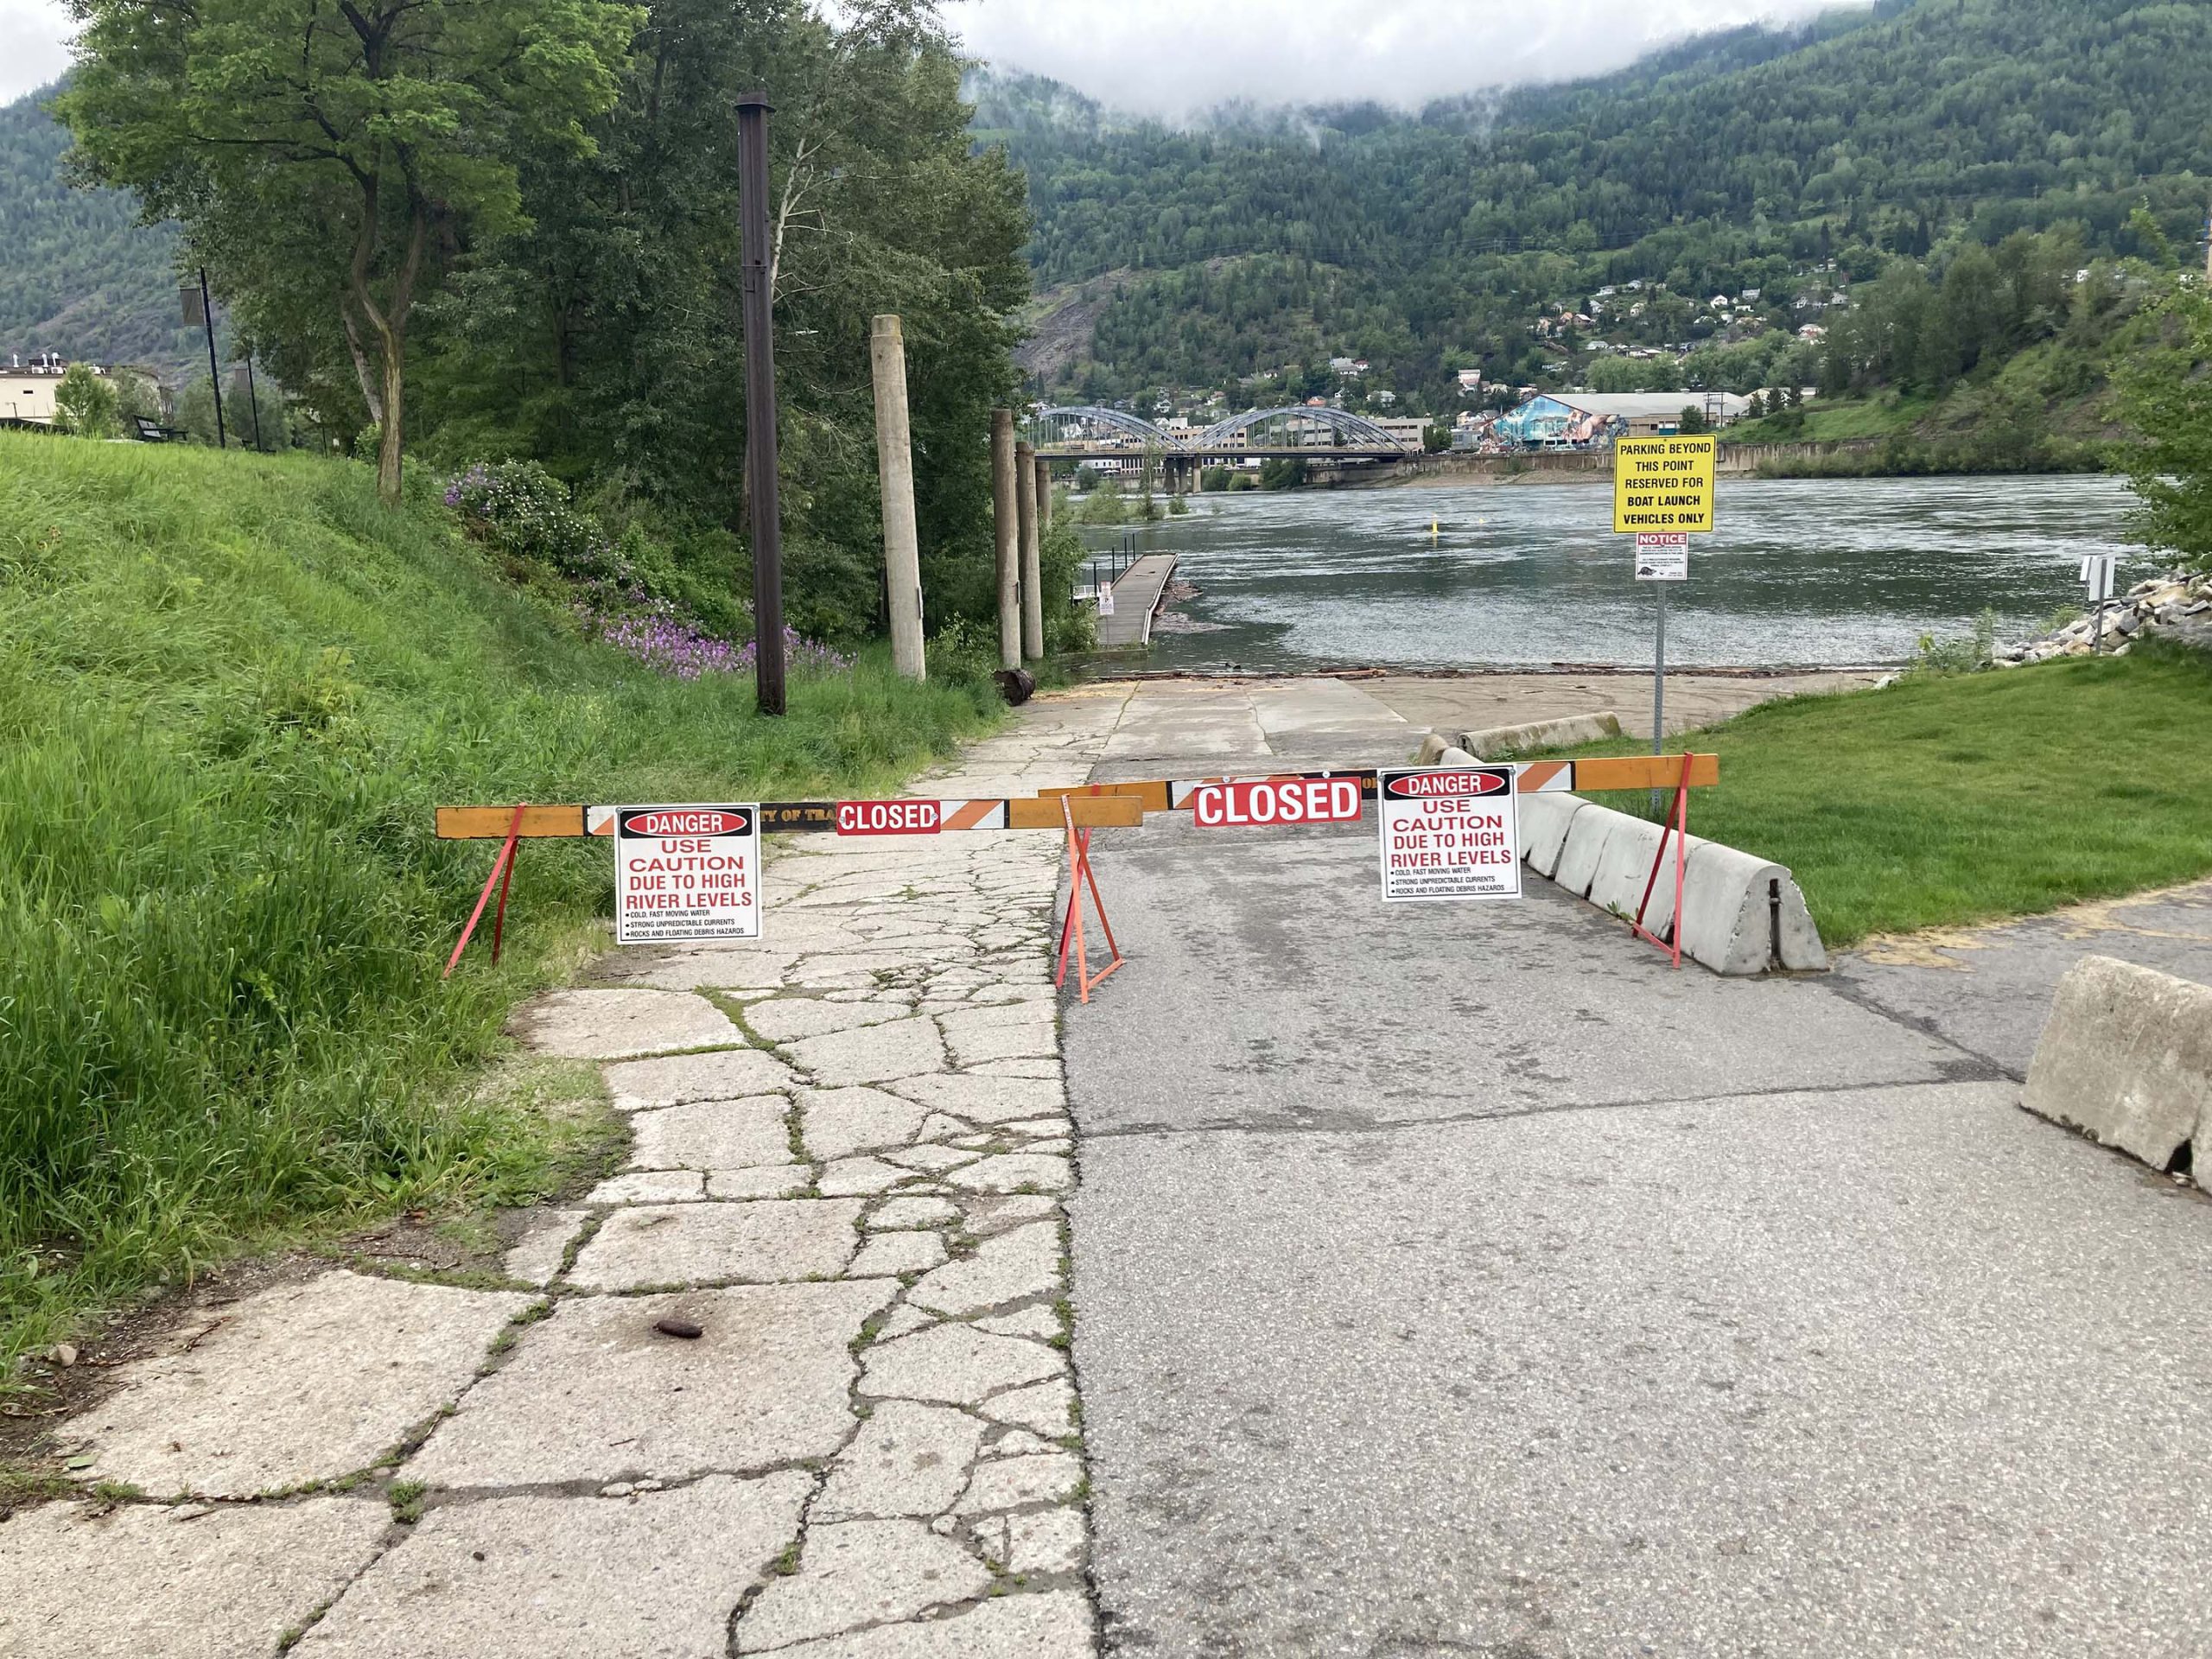 Gyro Park boat launch temporarily closed